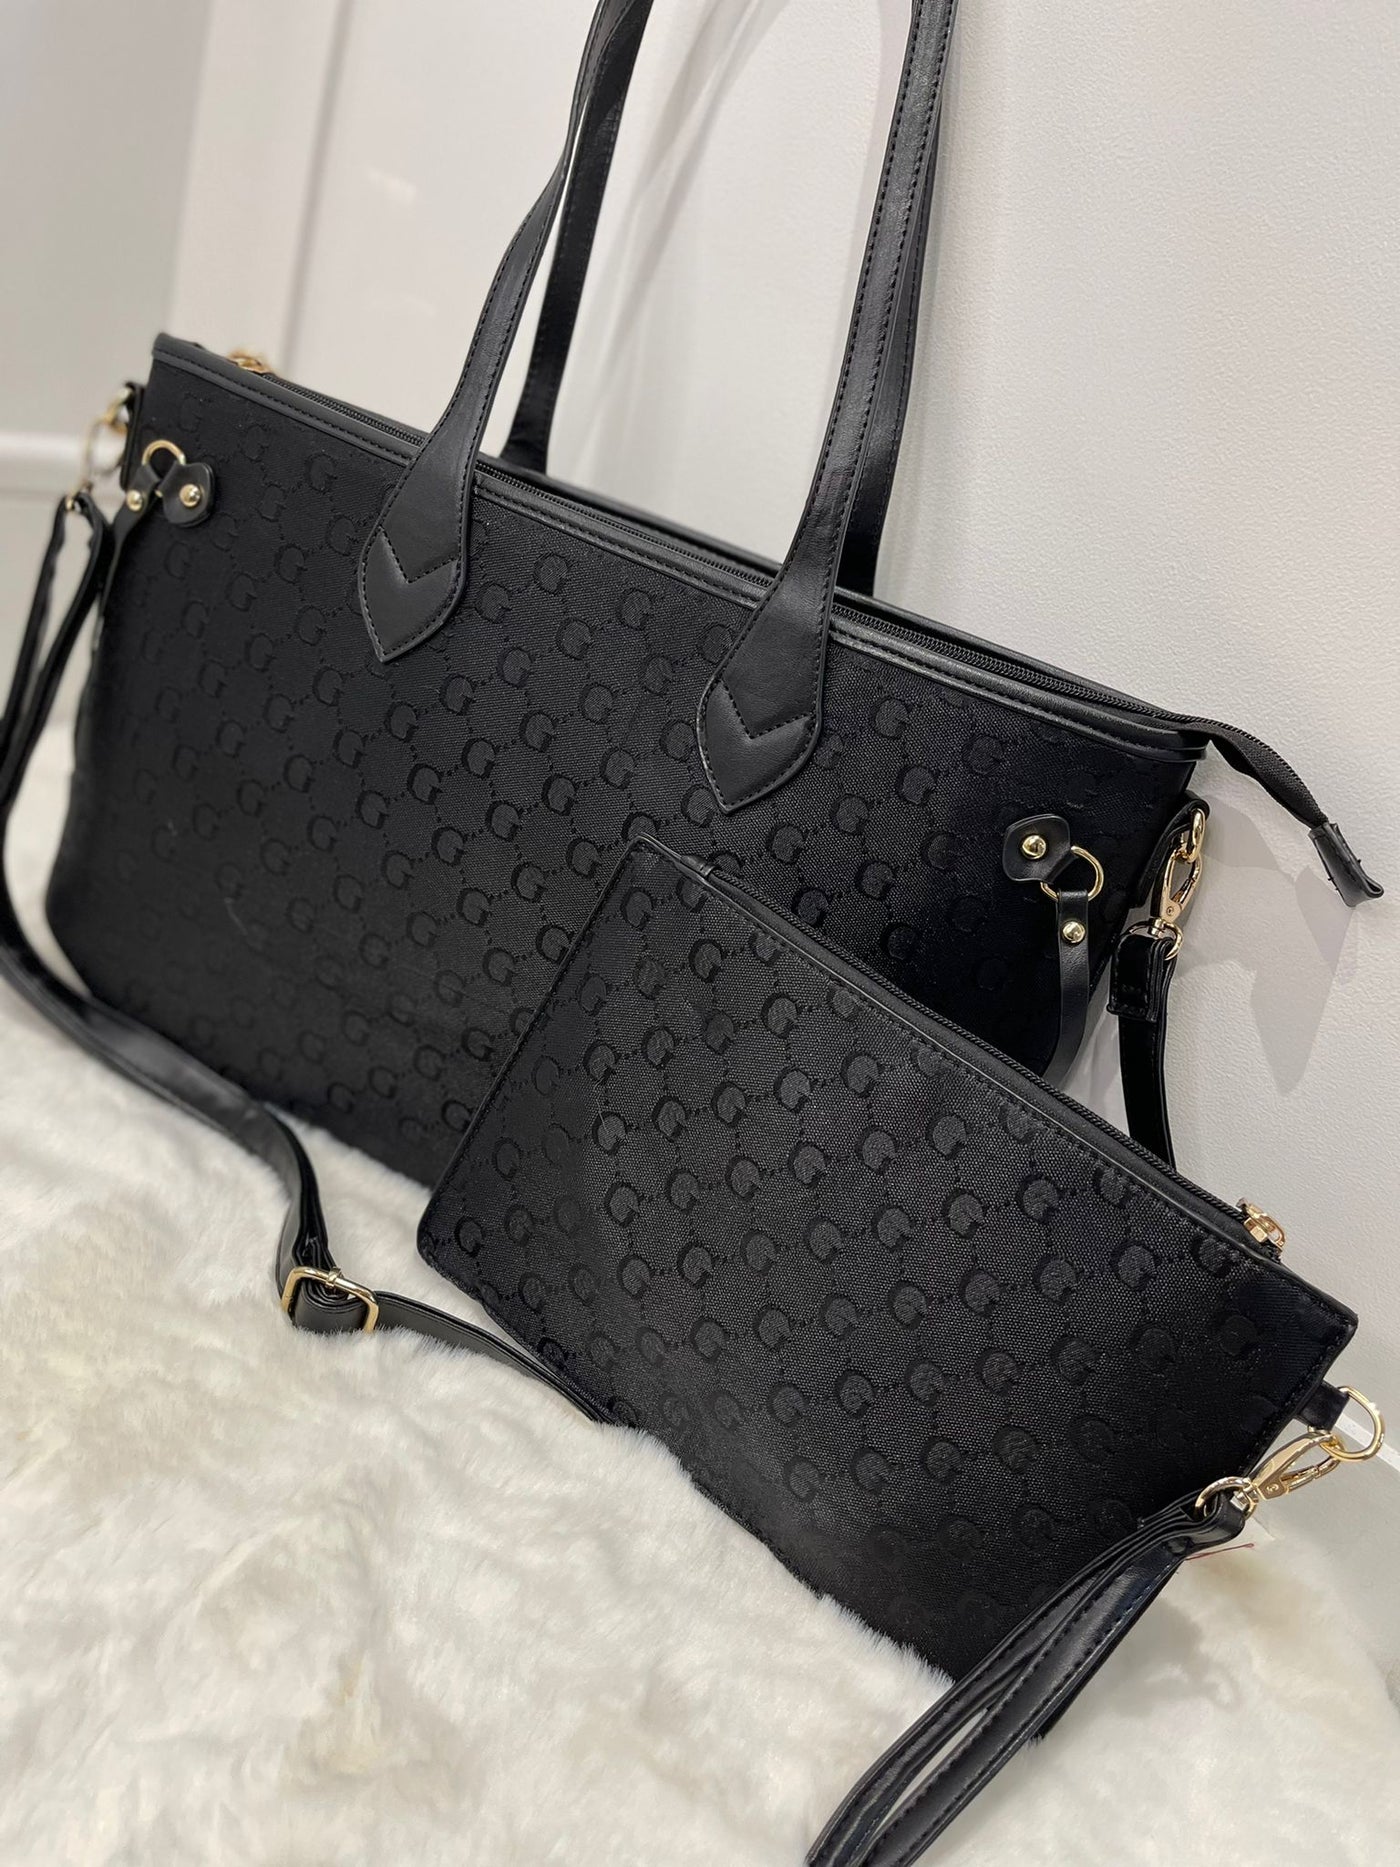 Black GG shoulder bag and small clutch